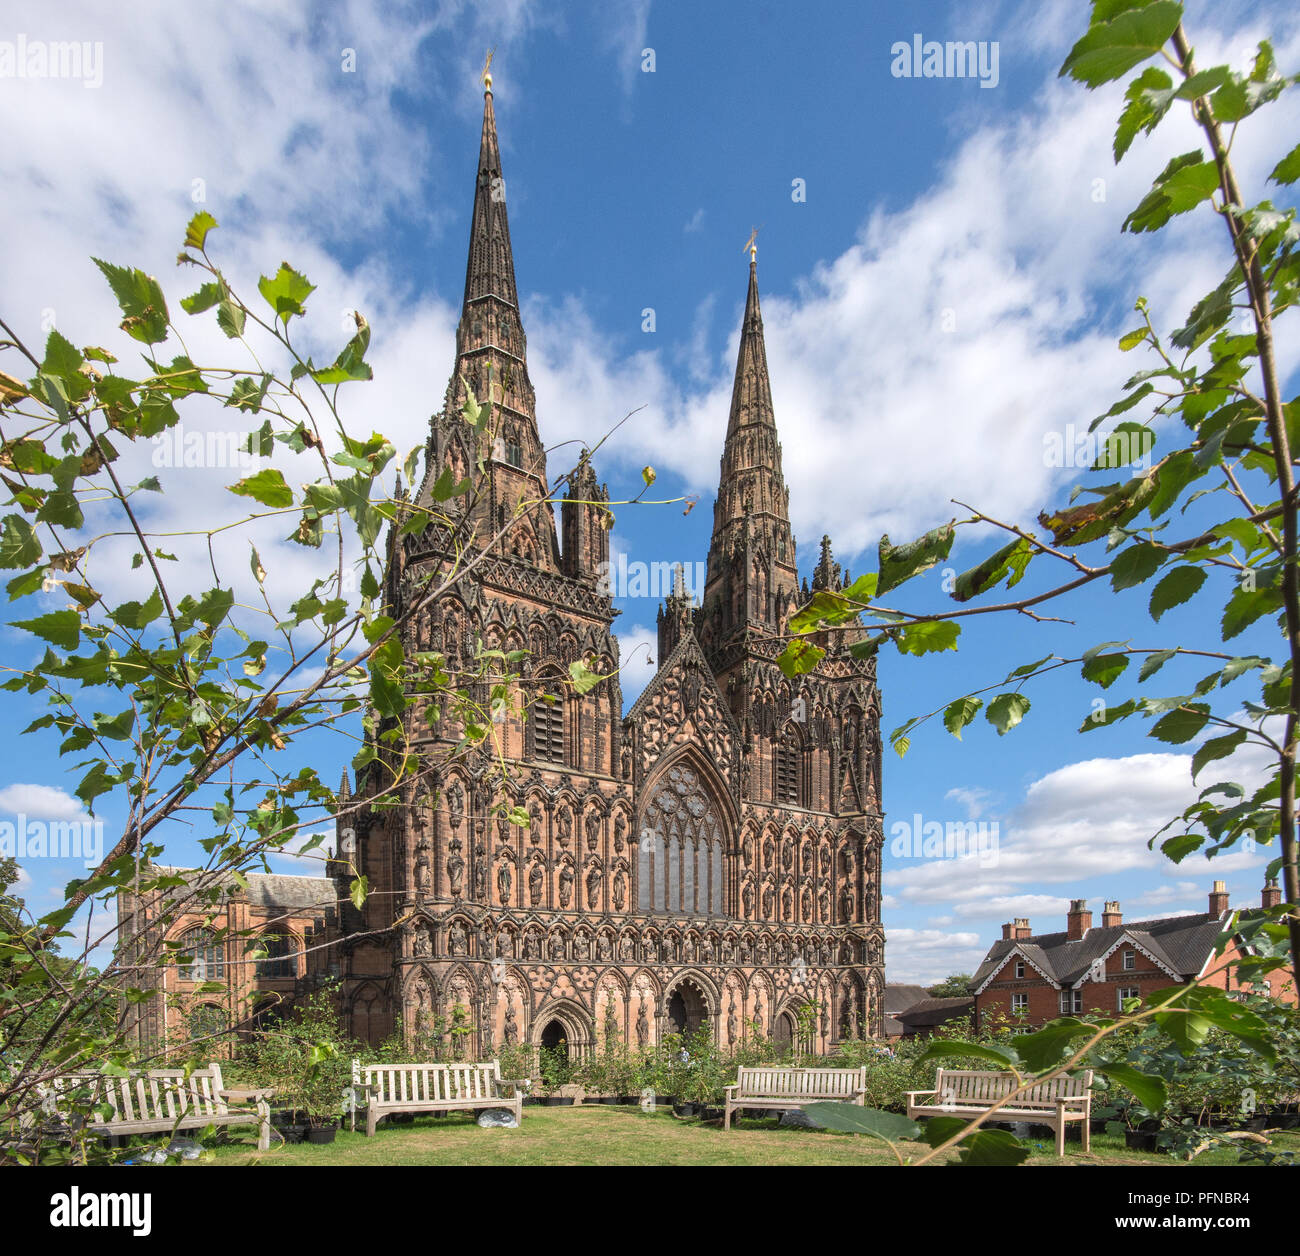 Lichfield Cathedral Staffordshire England with 1918 trees forming a Peace Woodland as part of a Great Exhibition, Imagine Peace, to celebrate the centenary of 1918 created by artist in residence Peter Walker from 17th August 2018 to 27th August 2018.  After the Exhibition the trees will be planted in Beacon Park Lichfield. Stock Photo